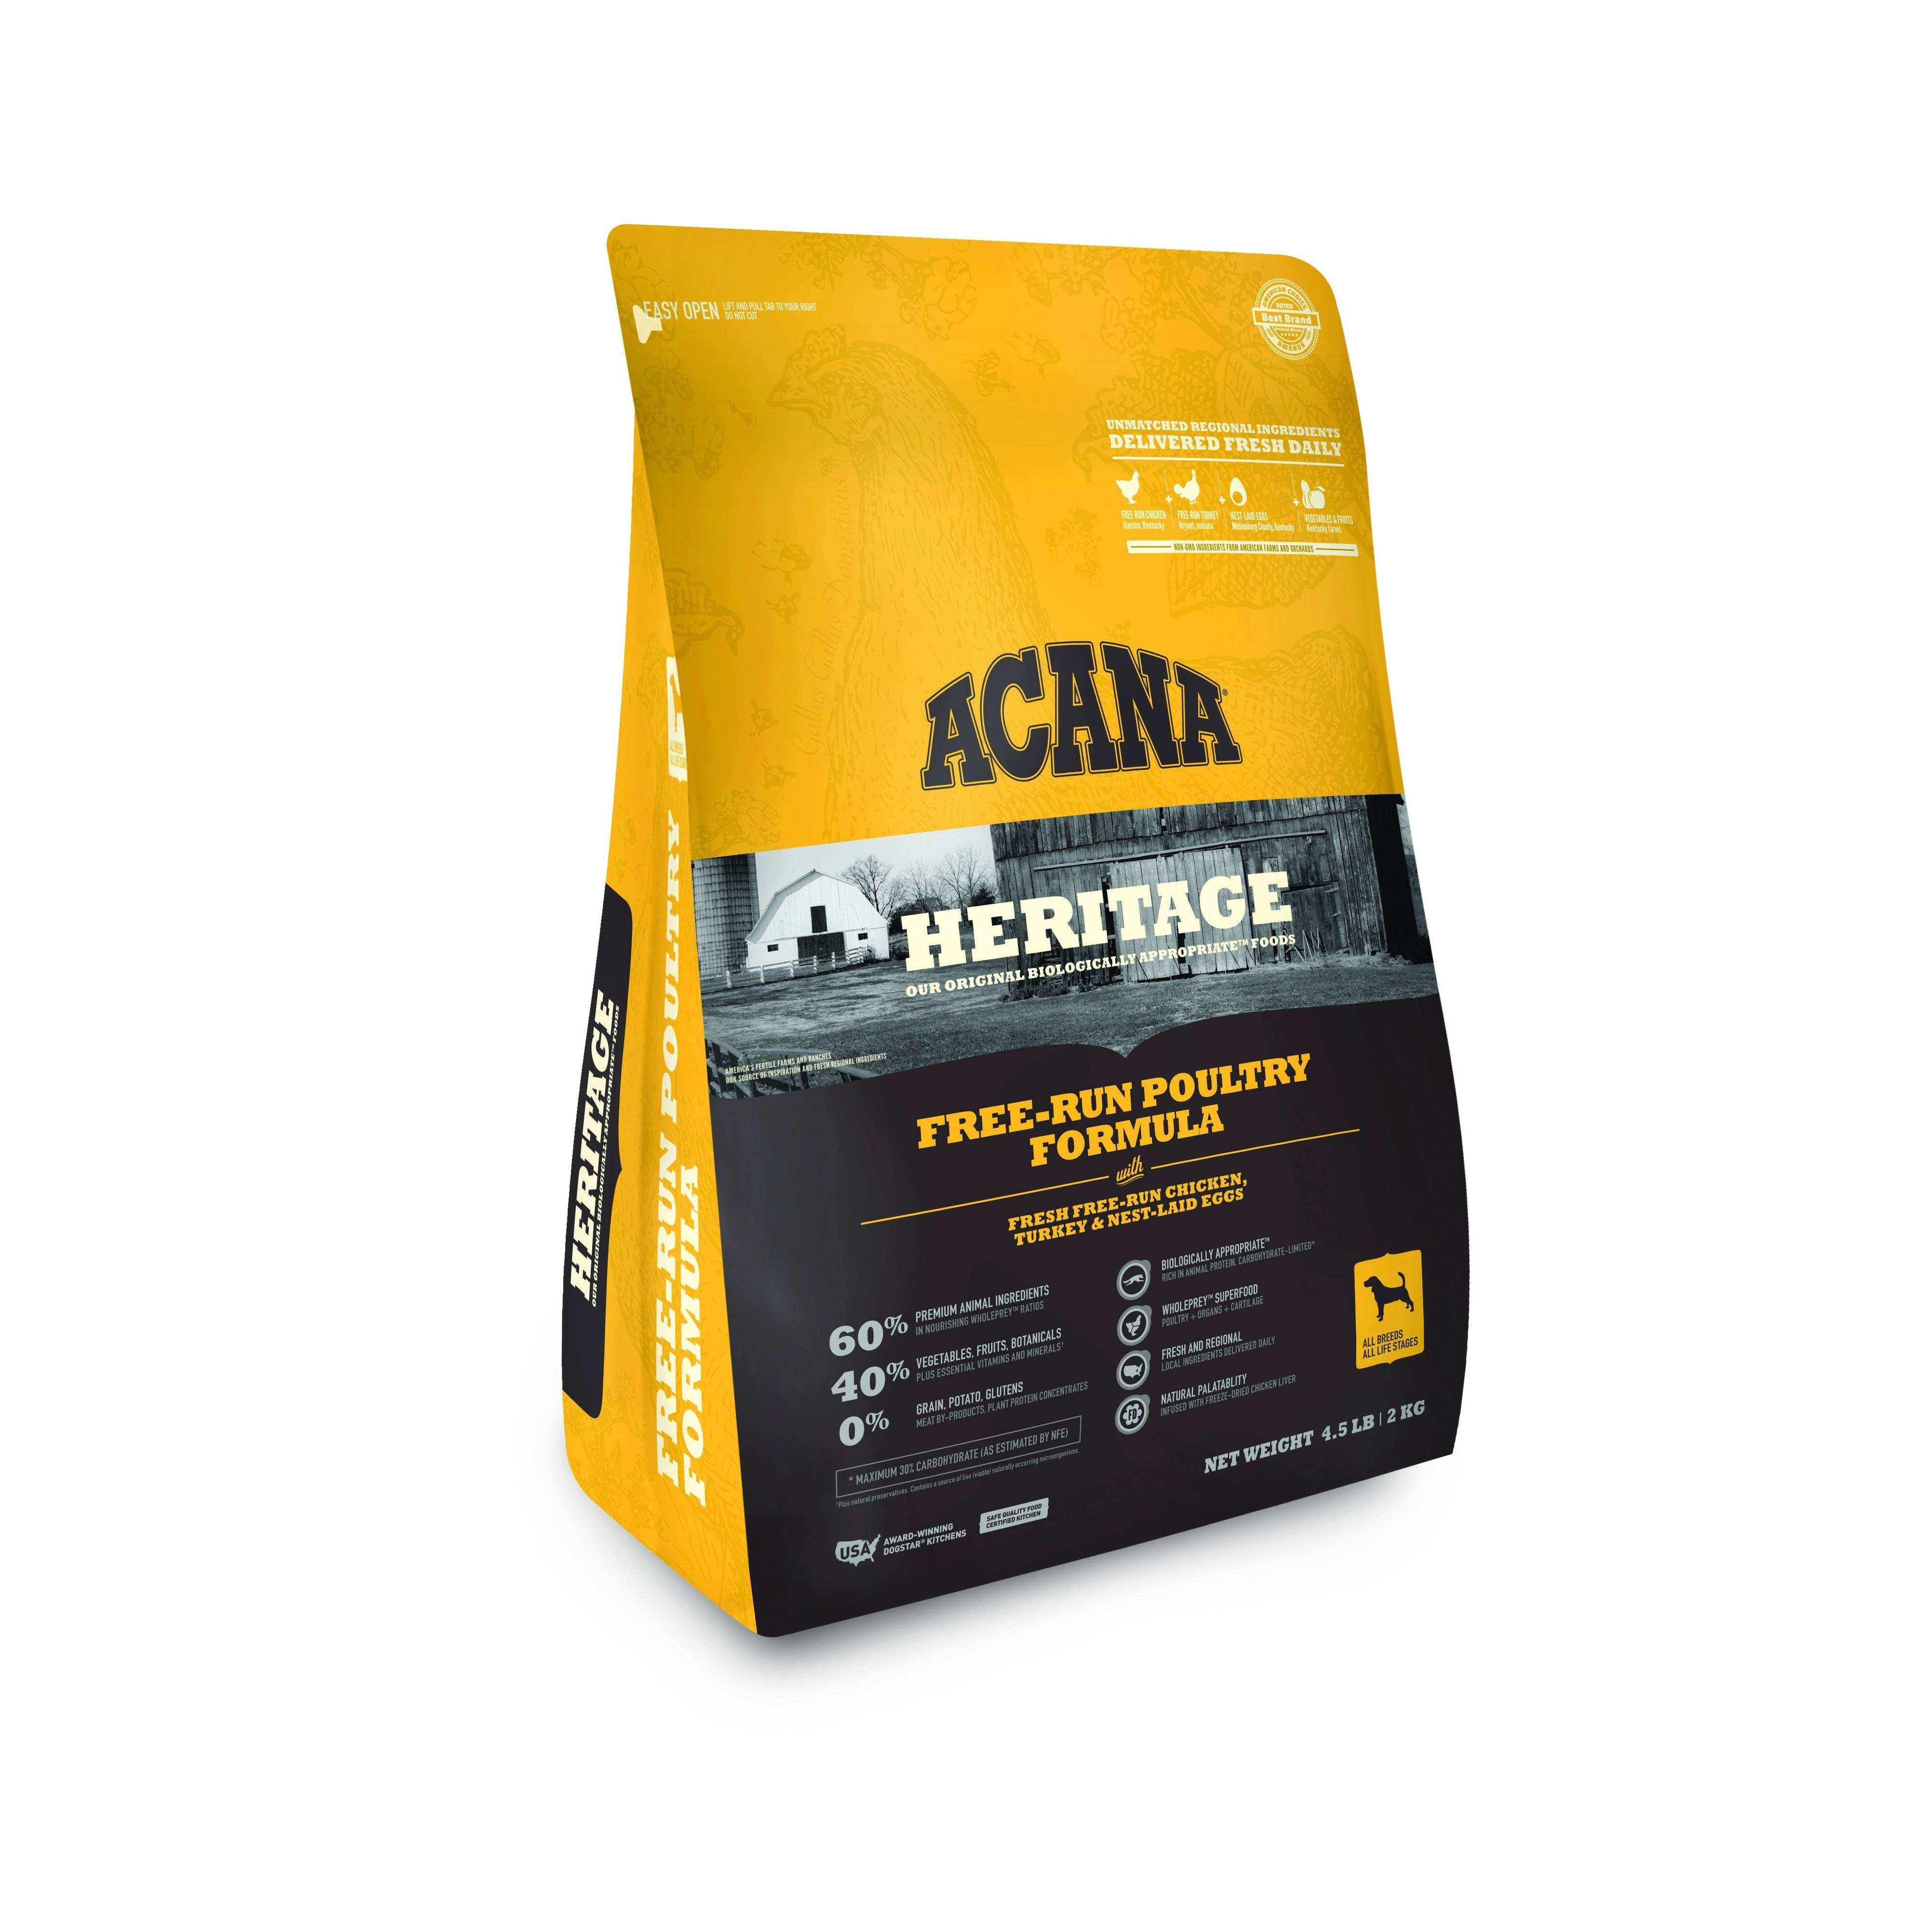 ACANA Heritage Poultry Dry Dog Food, 4.5 lb